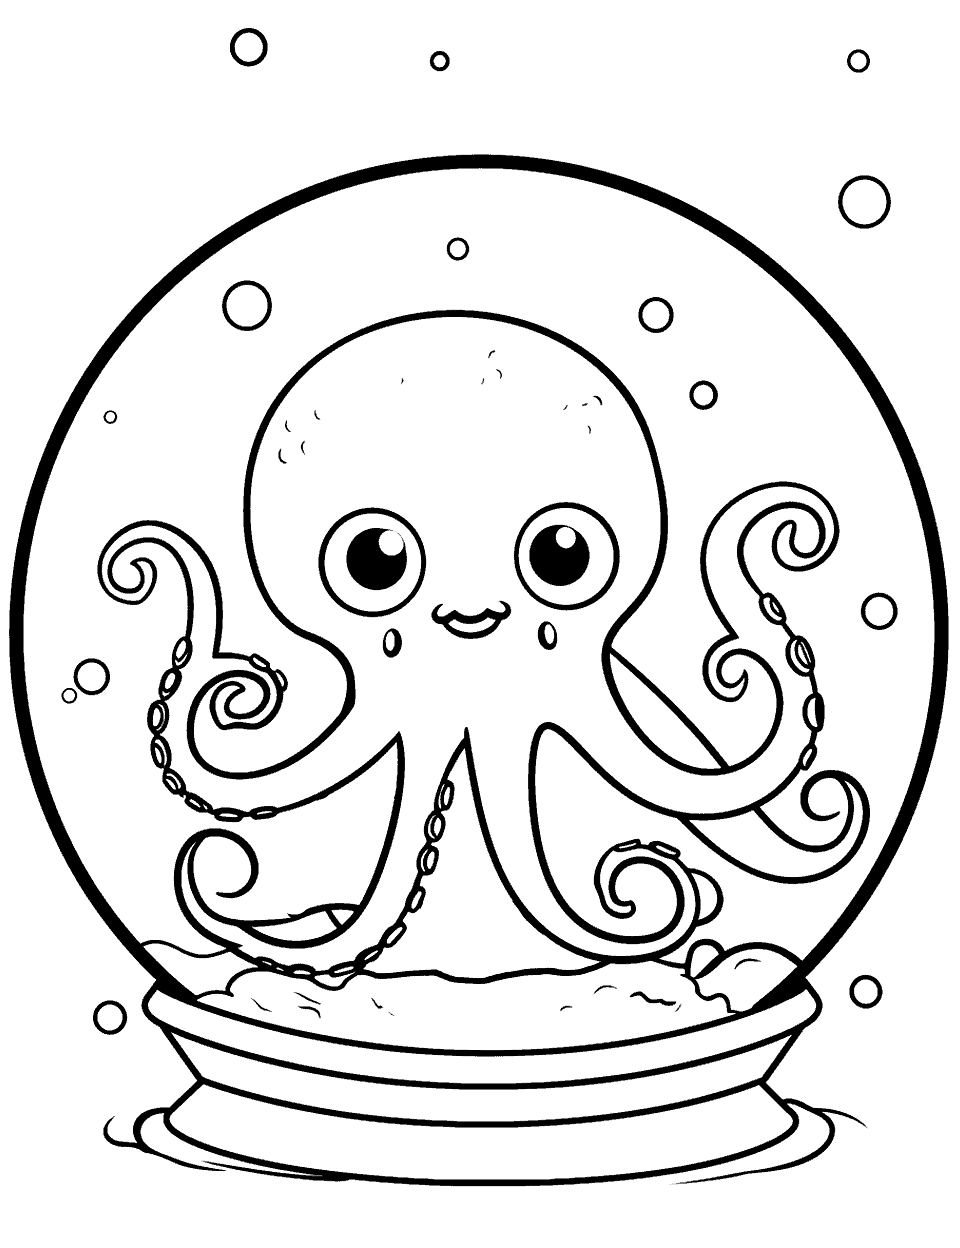 Octopus in a Snow Globe Coloring Page - A charming scene of an octopus inside a snow globe.